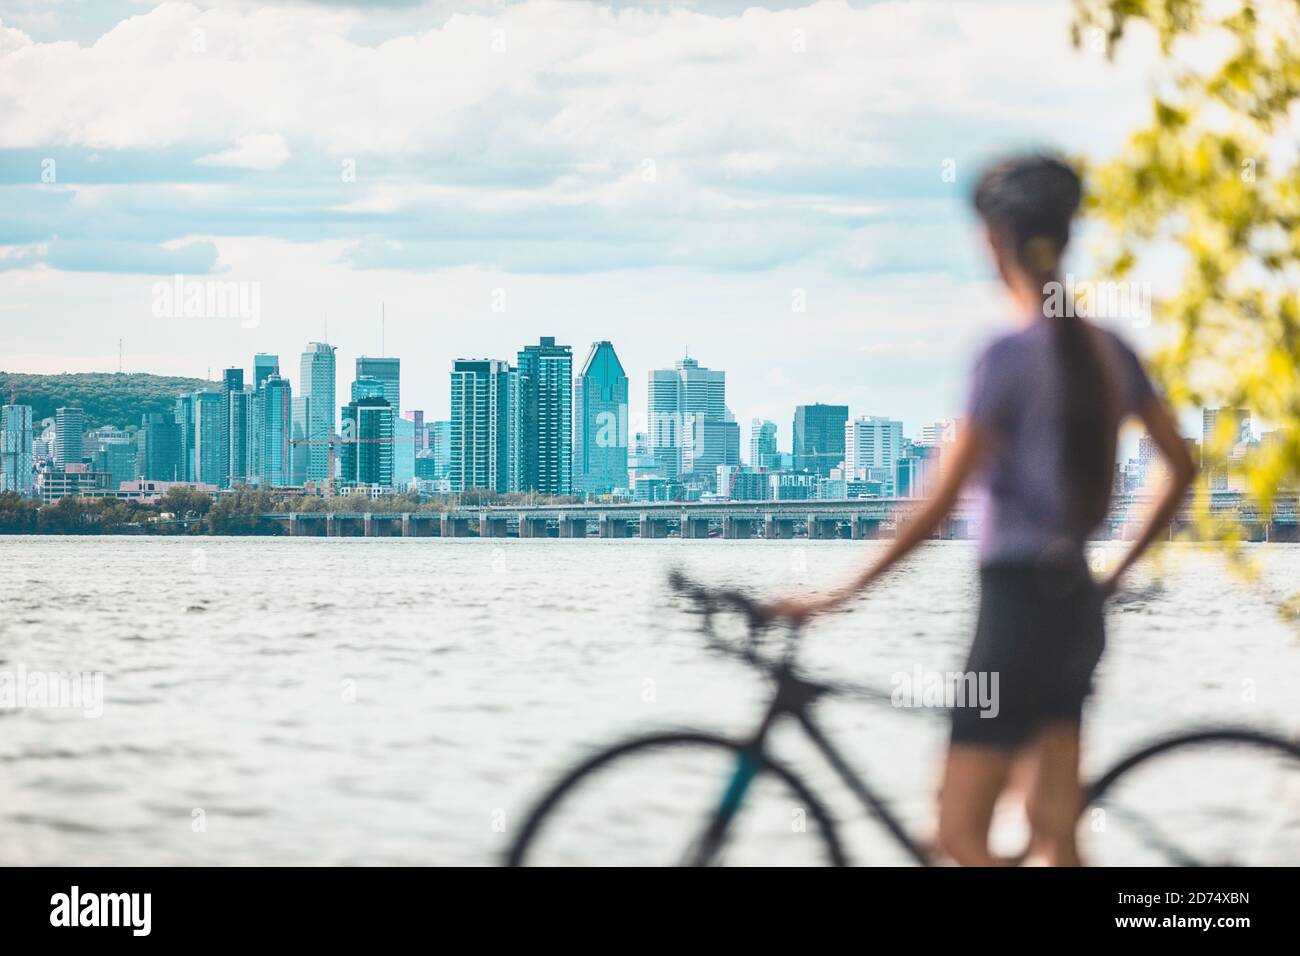 Montreal biking woman cyclist with bike looking at skyline view of condo towers and buildings downtown against Mount Royal landscape. Summer outdoor Stock Photo